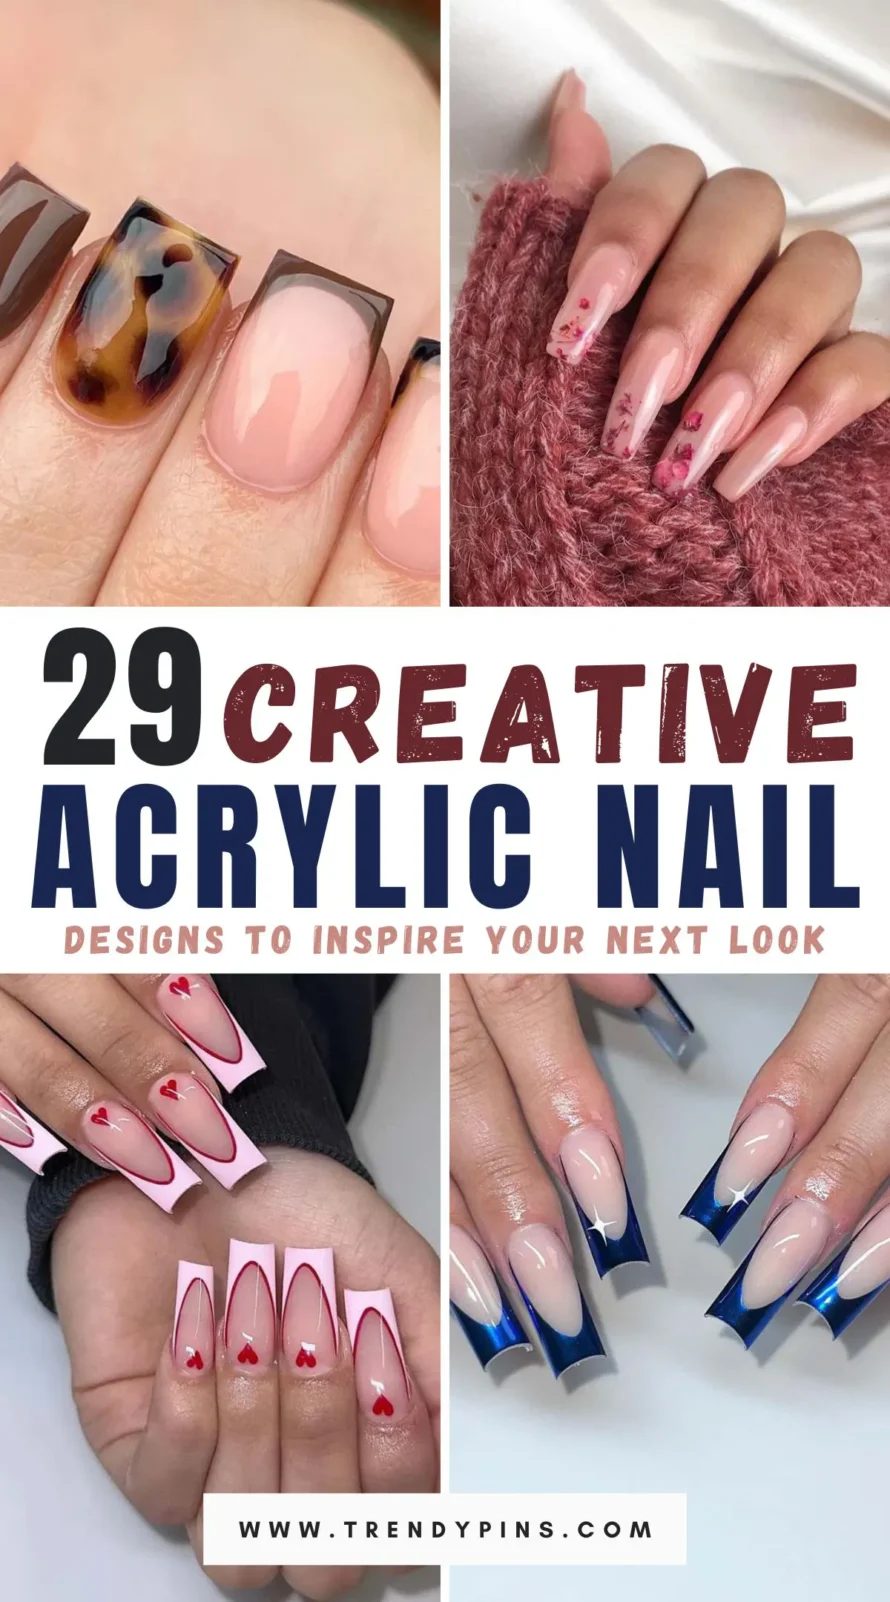 Discover 29 stunning acrylic nail designs that showcase the future of nail art, featuring bold colors, intricate patterns, and innovative techniques.
